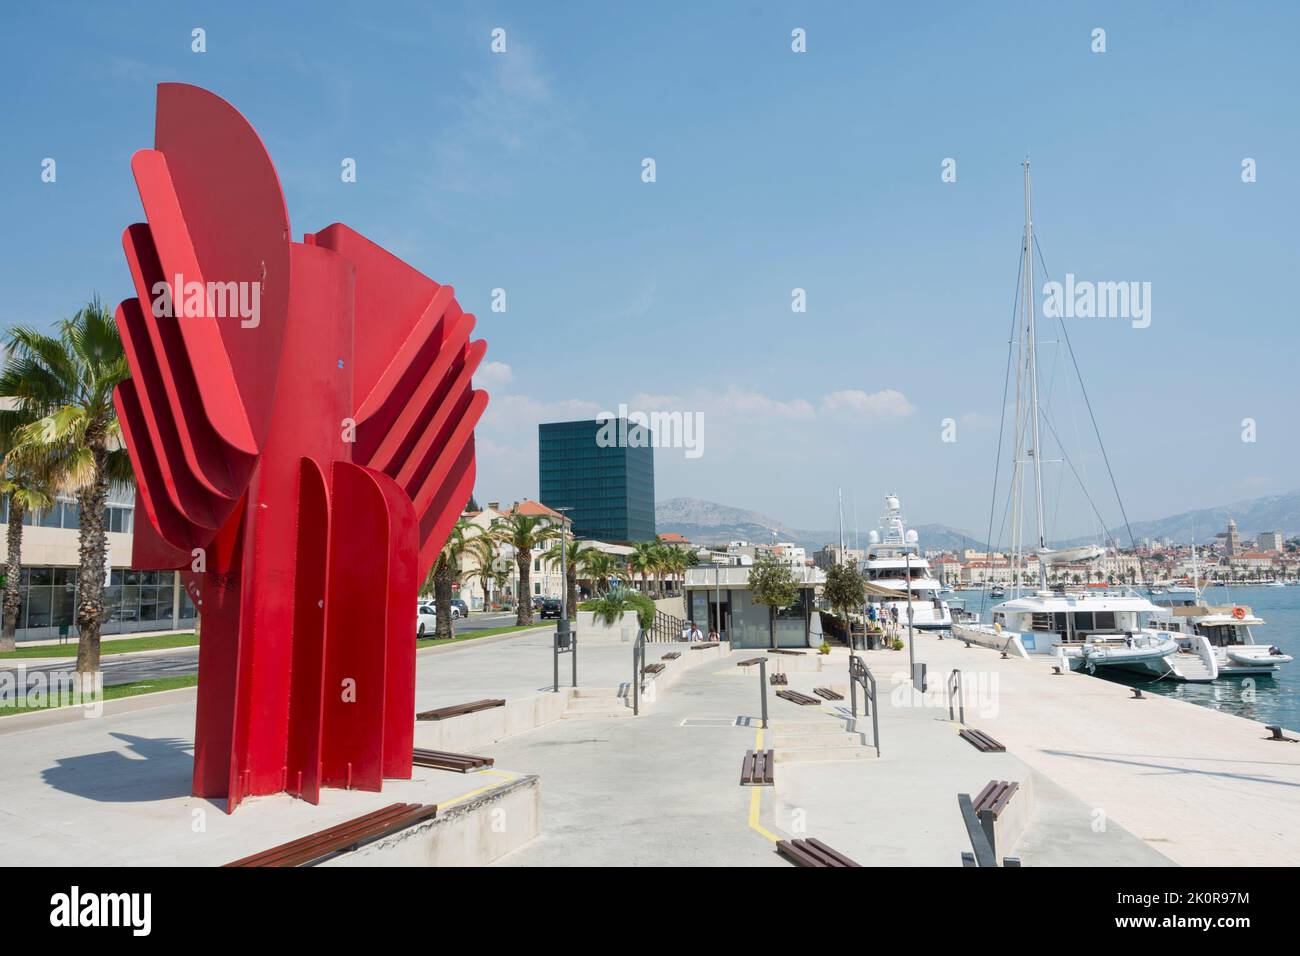 Red sculpture of visual artist Jagoda Buic and glass cube of Hotel Marjan in the background on the boulevard of the ACI Marina in Split, Croatia Stock Photo